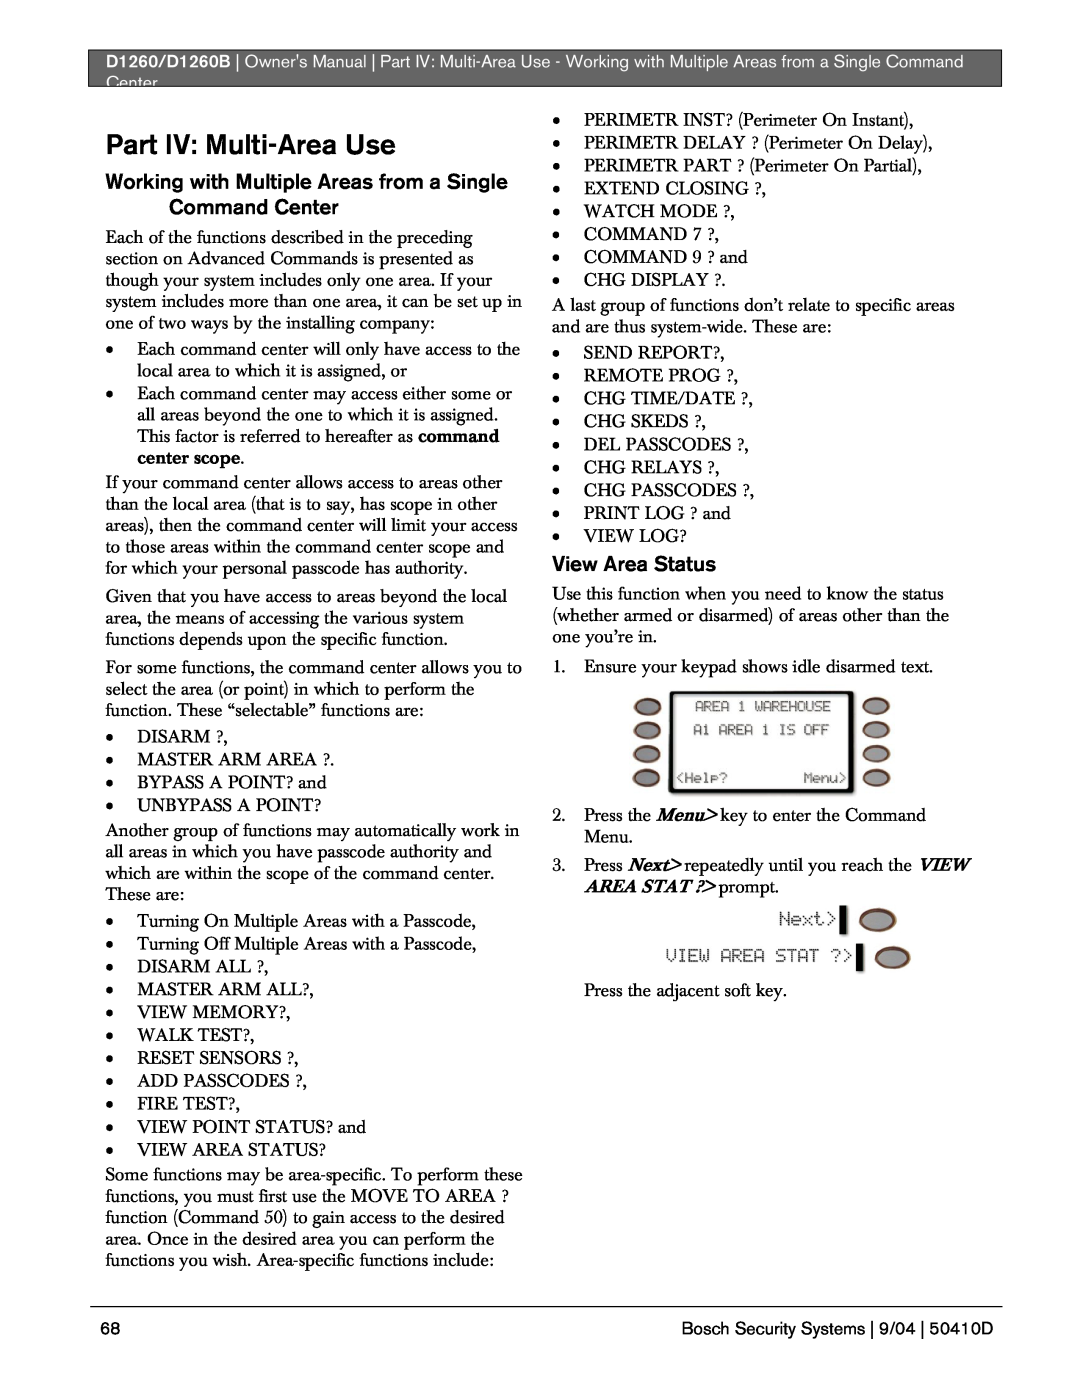 Bosch Appliances D1260B owner manual Part IV: Multi-AreaUse, View Area Status 